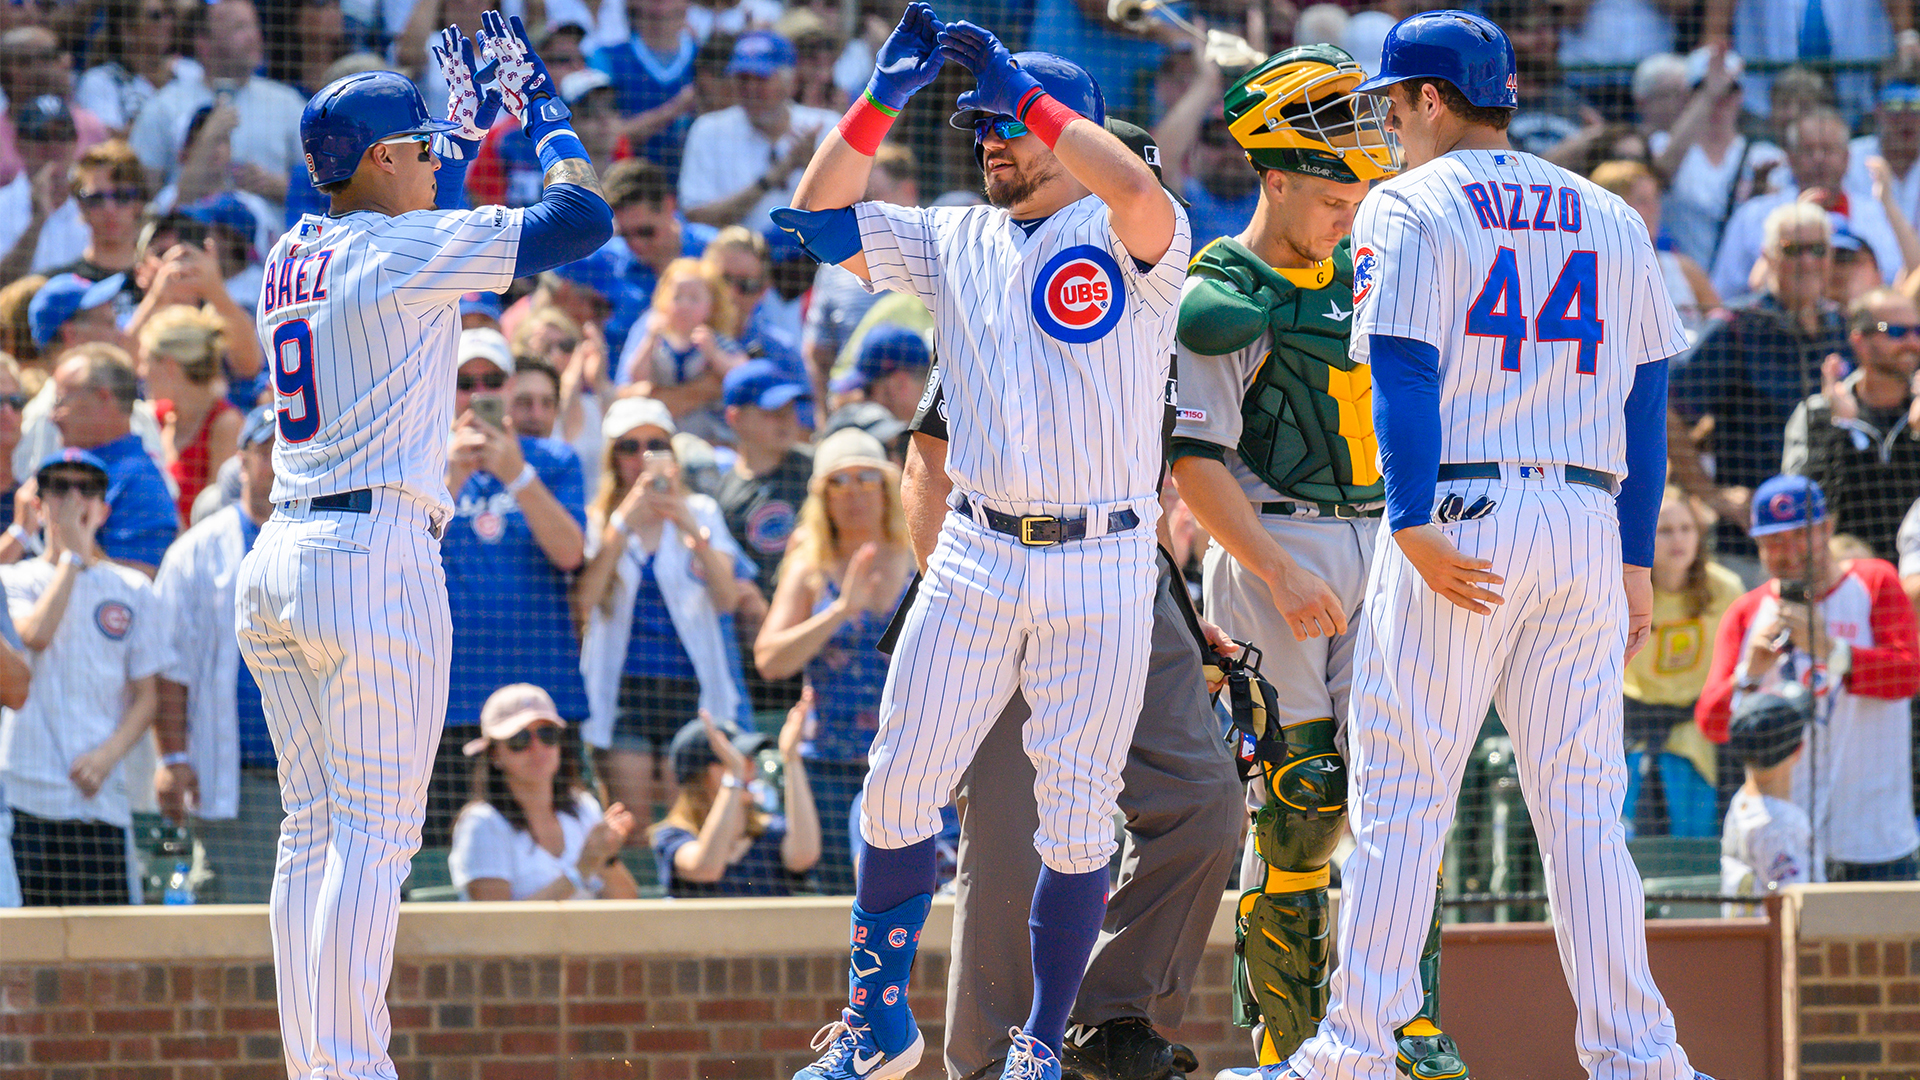 Chicago Cubs can fill Wrigley Field at 20% capacity to start the